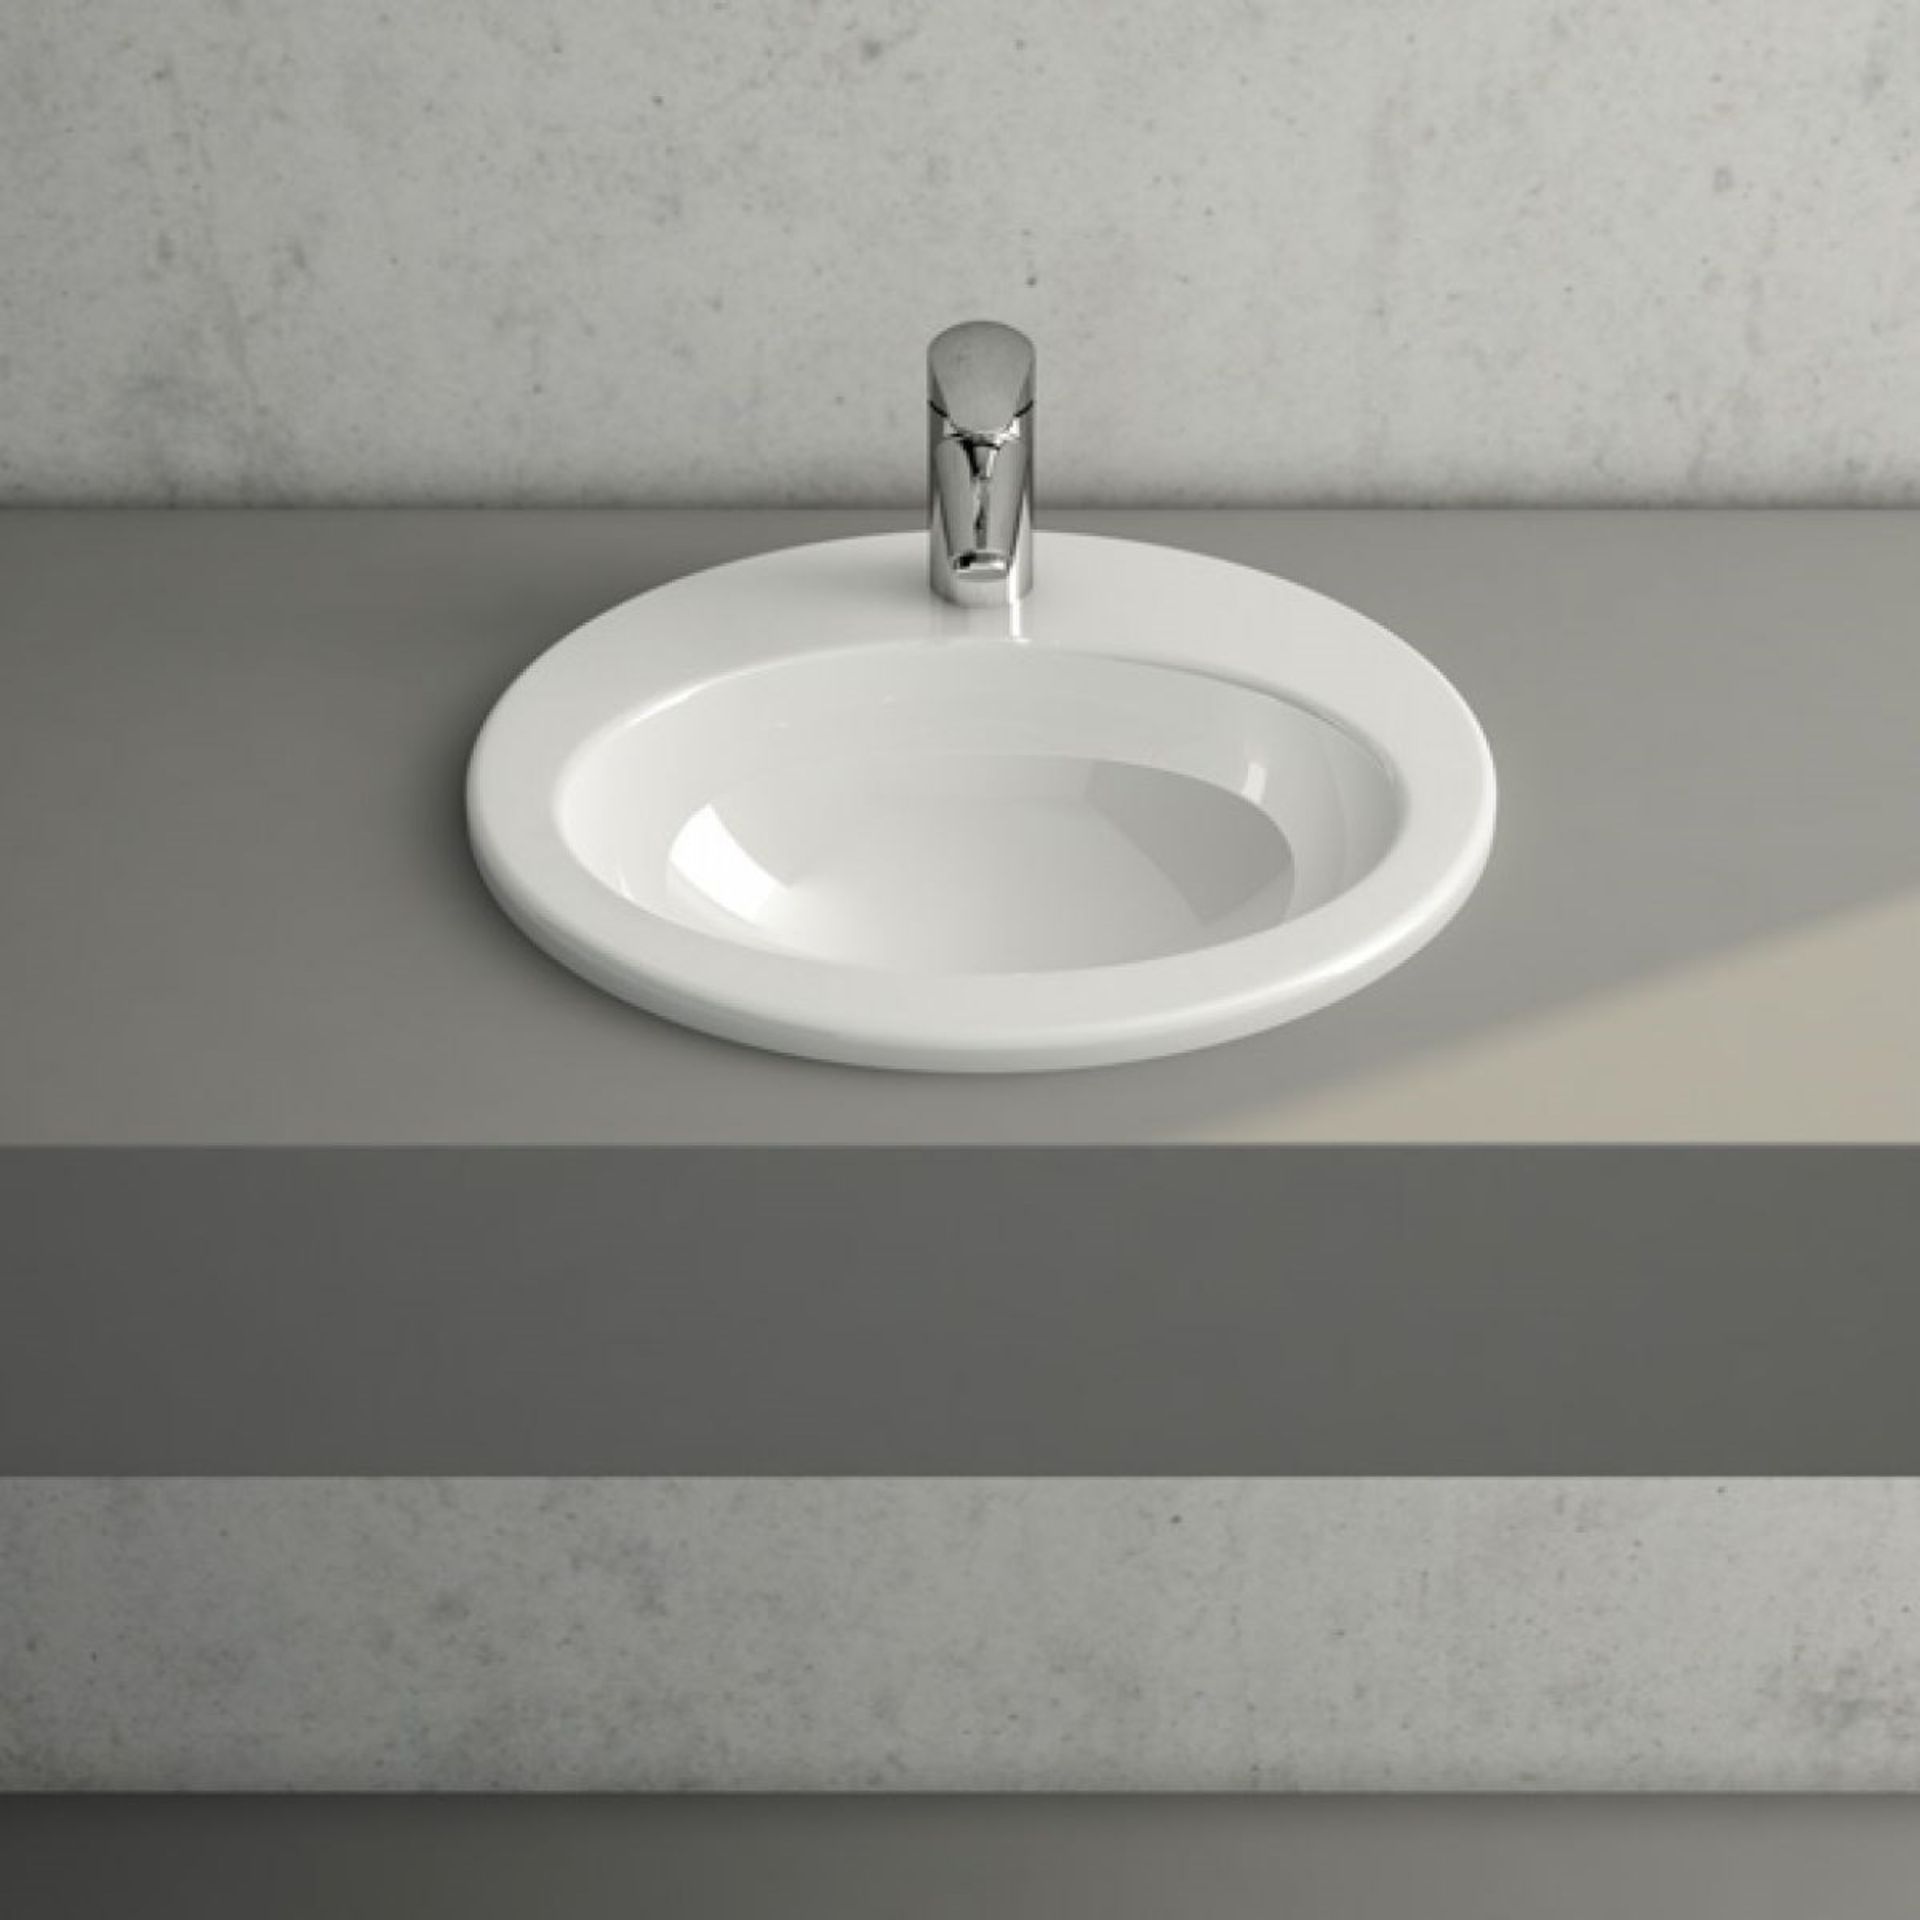 (RR158) VitrA S20 Round Inset Basin. RRP £103.99.This VitrA S20 basin has been carefully desig...